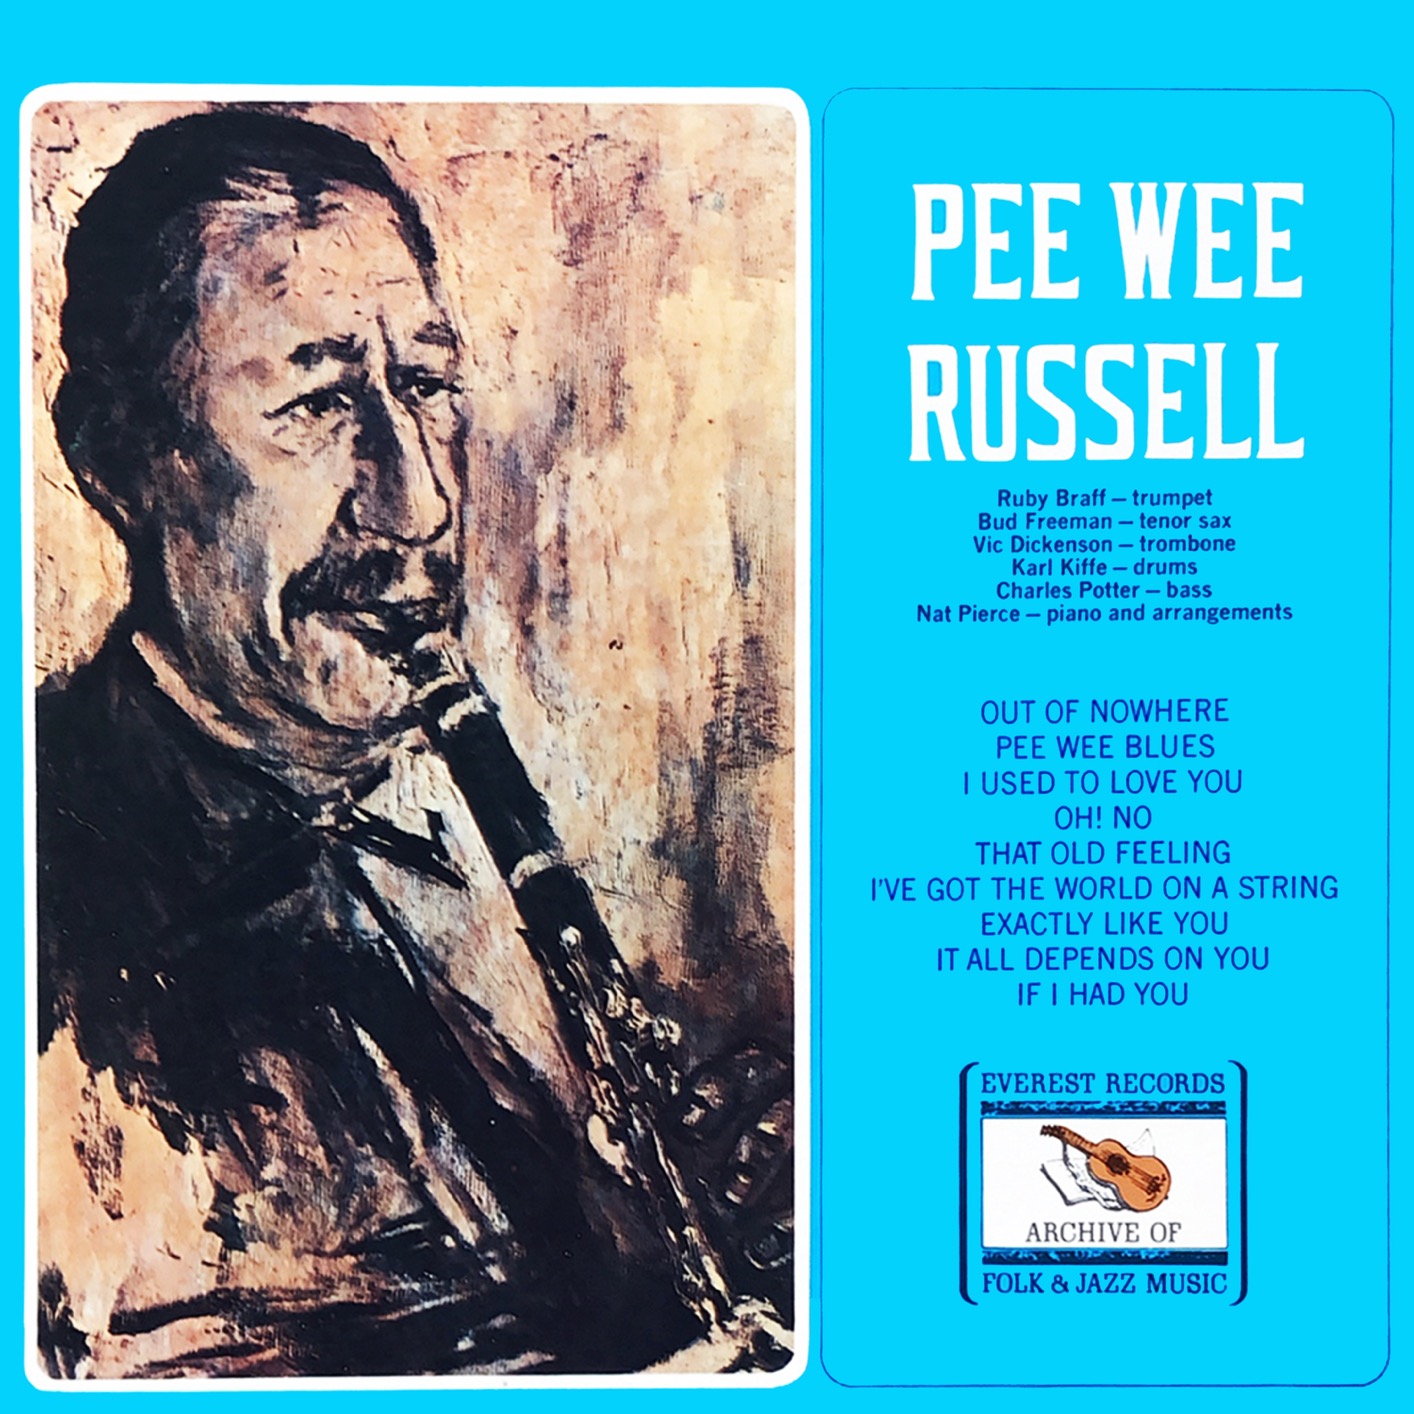 Pee Wee Russell - Pee Wee Russell (Remastered) (1958/2019) [FLAC 24bit/96kHz]